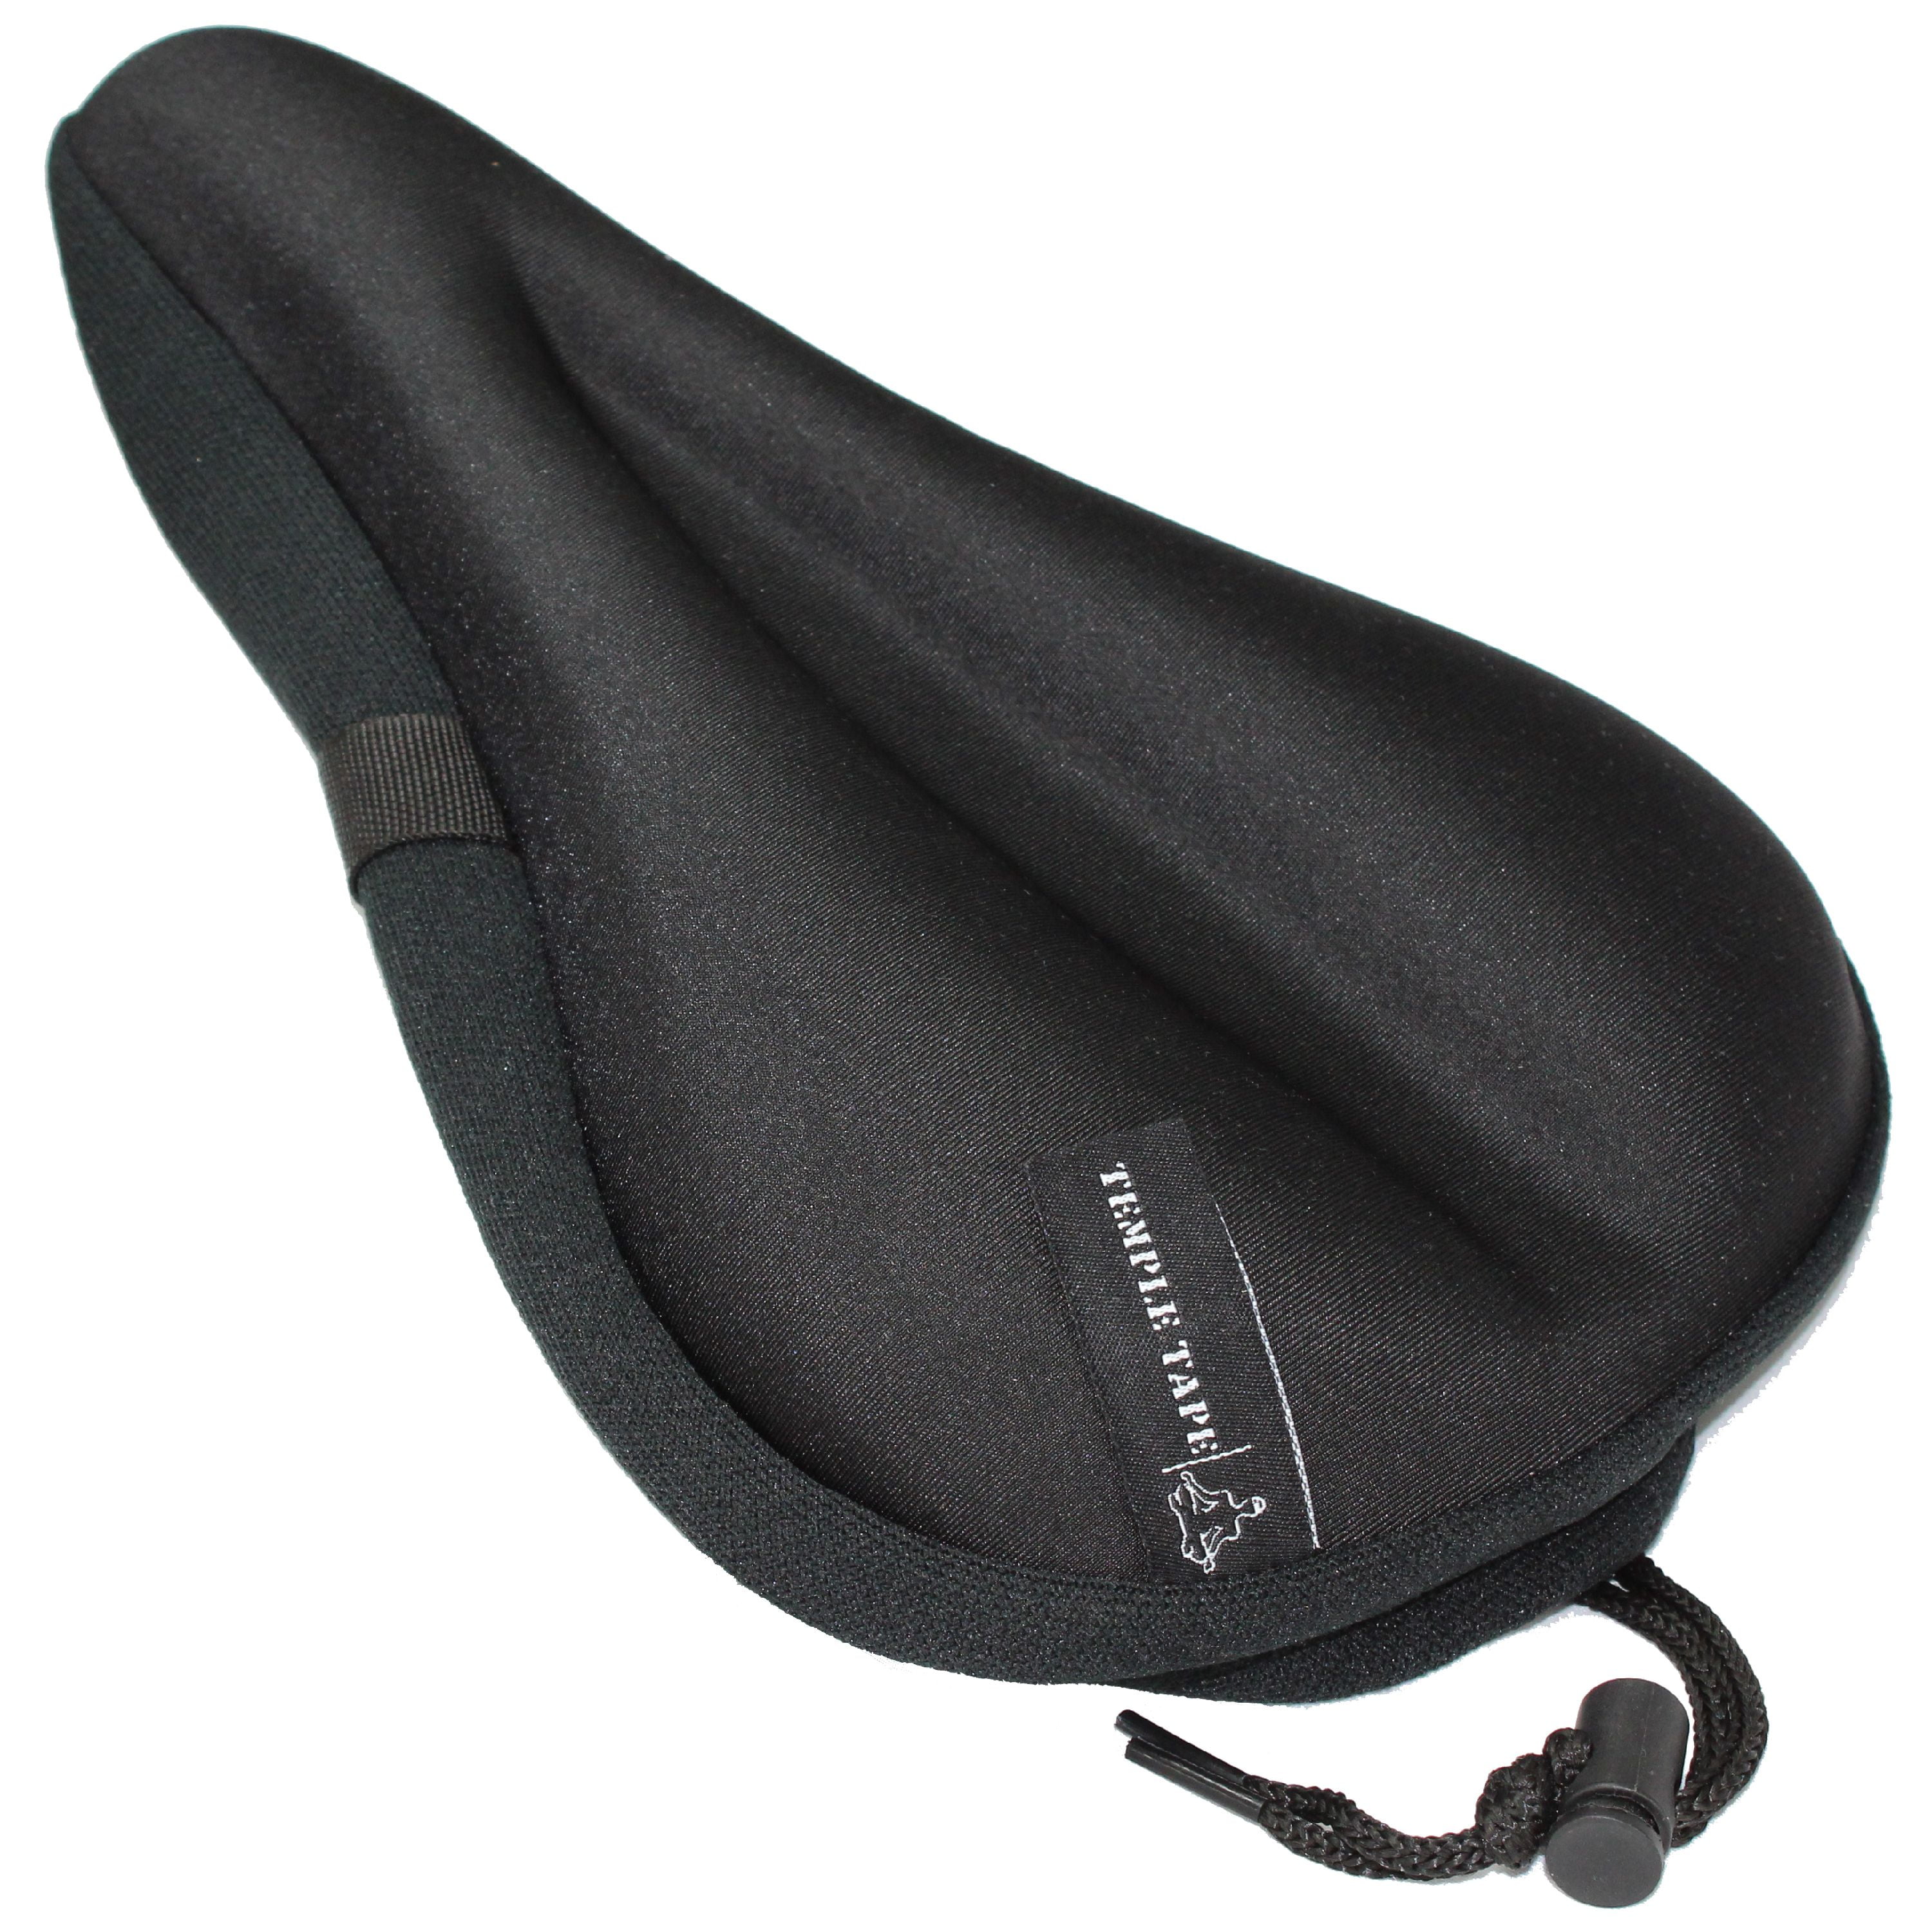 Non-Slip Bike Seat Pad Cover Free-fly Large Bike Seat Cushion with Drawstring- Extra Soft Gel Bicycle Seat Fits Cruiser and Stationary Bikes Indoor Cycling Black 